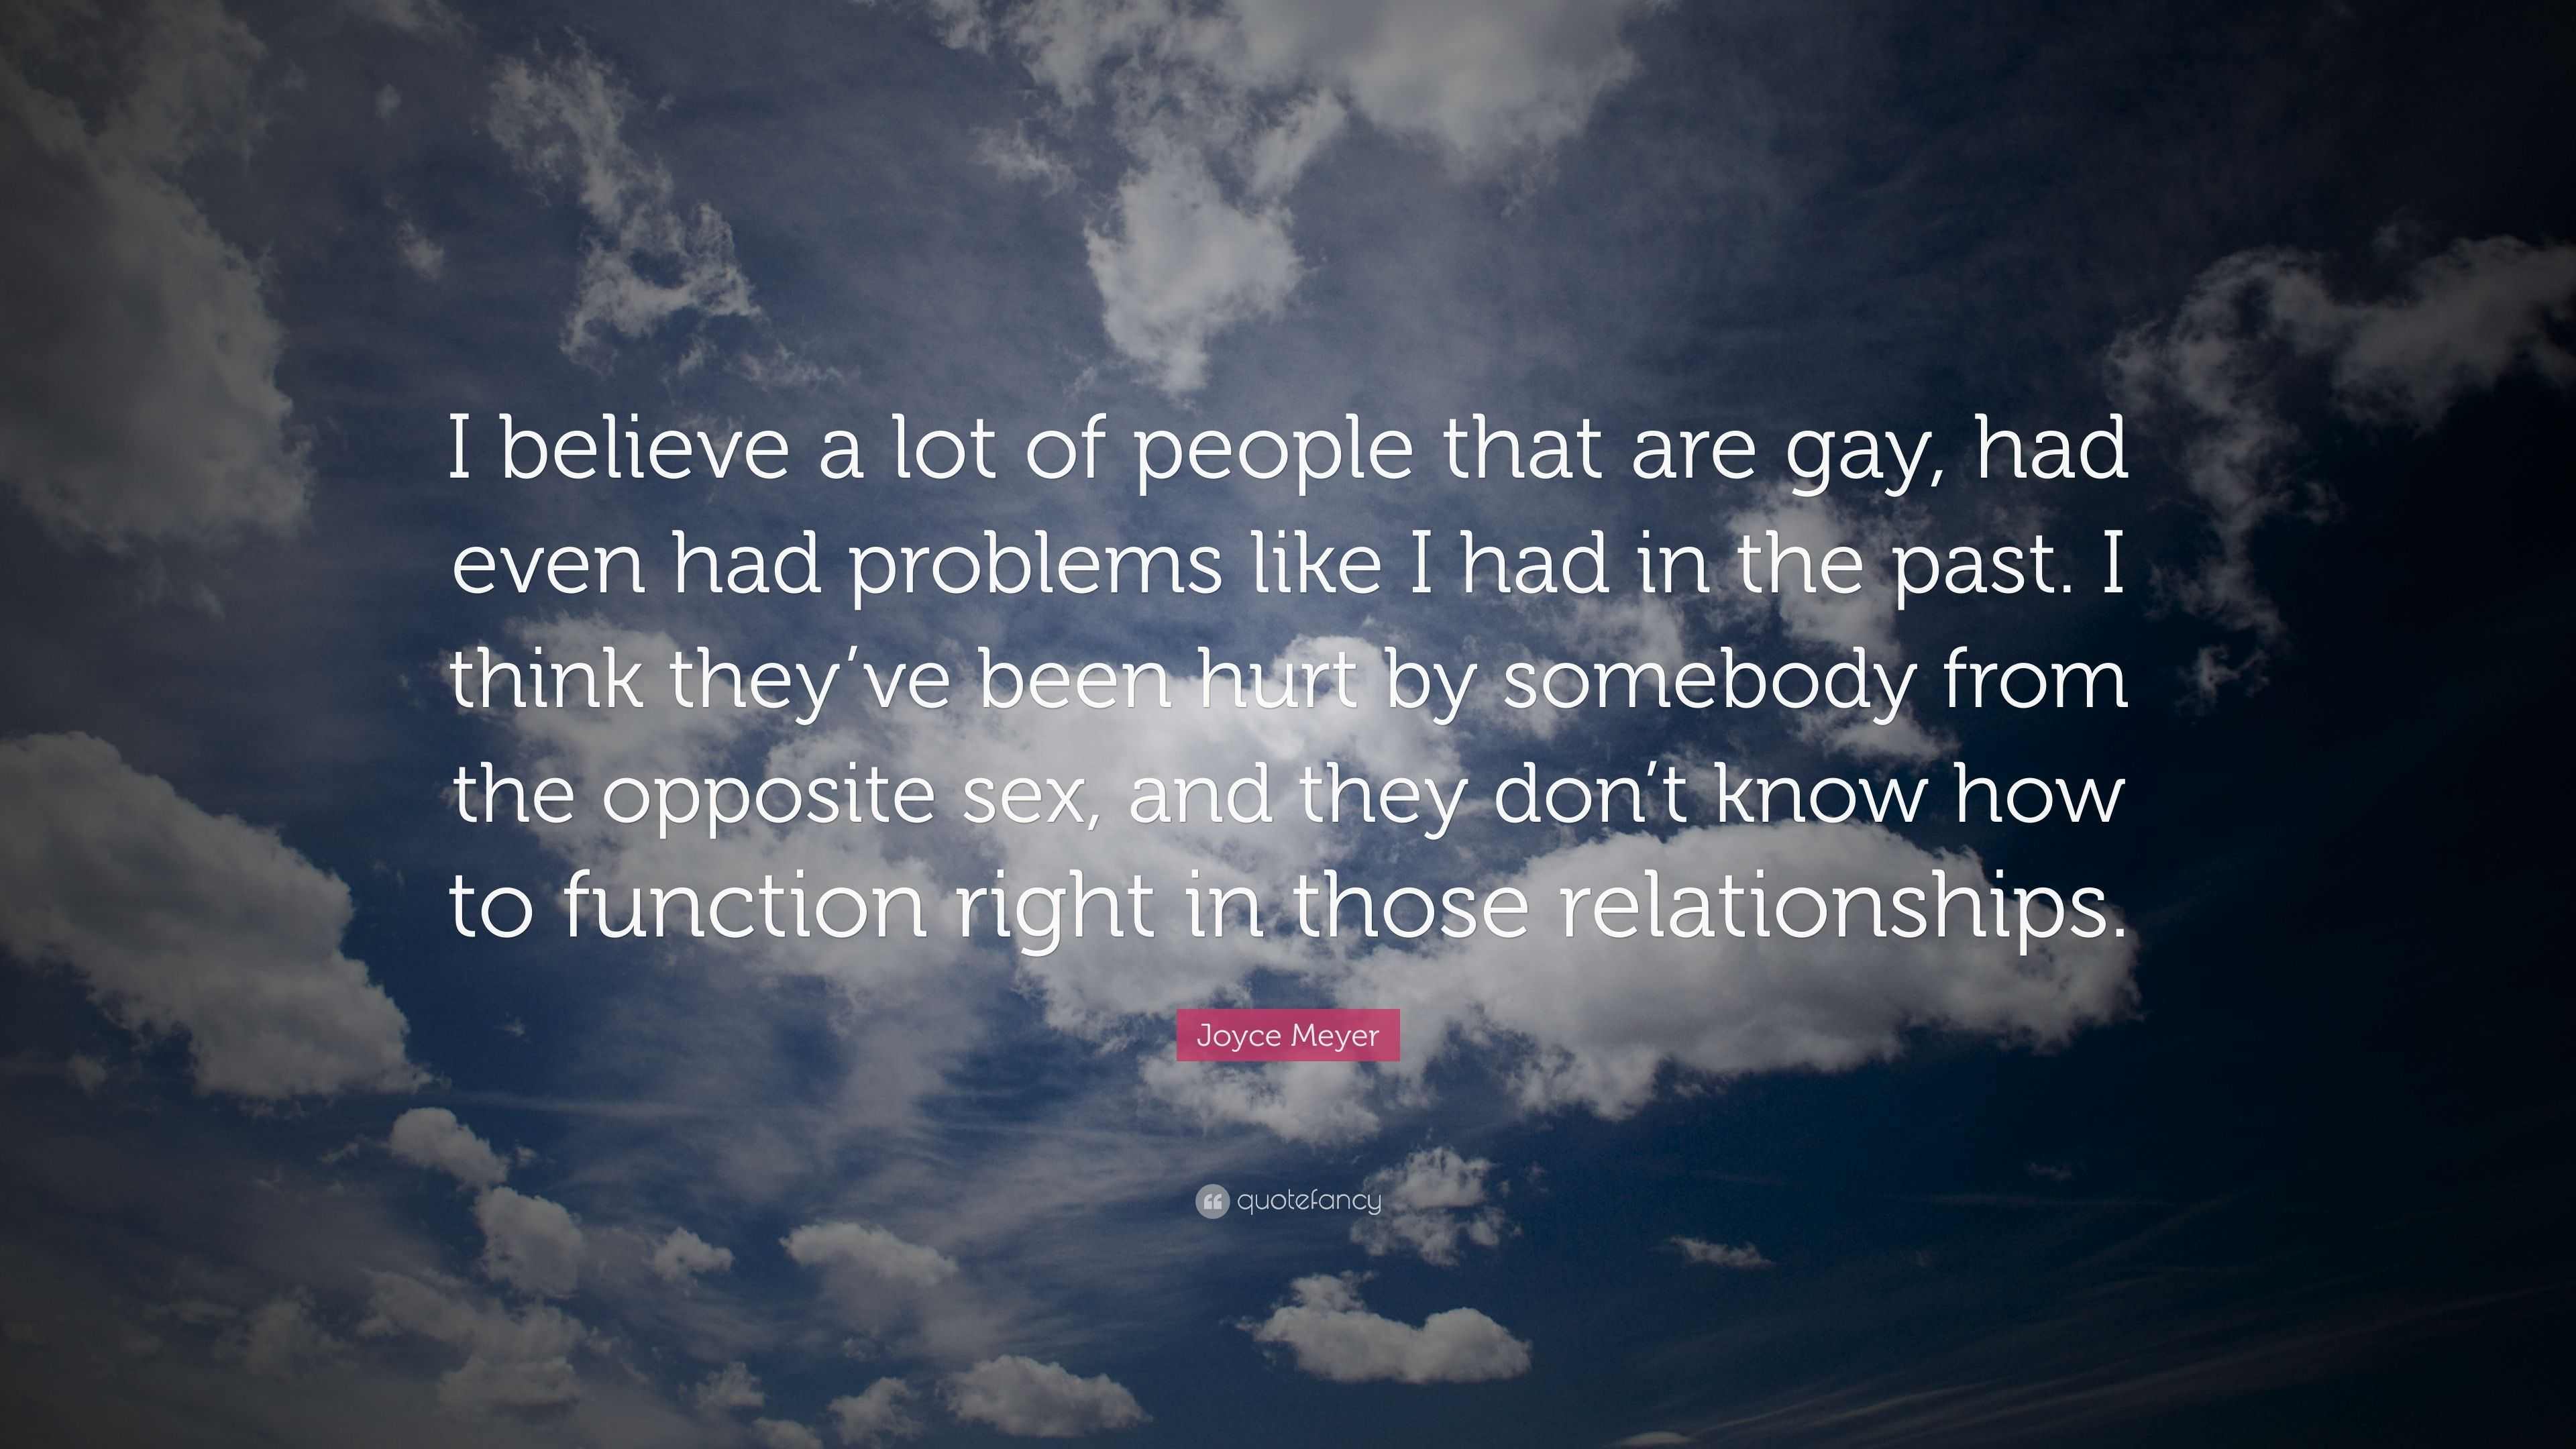 Joyce Meyer Quote “I believe a lot of people that are gay